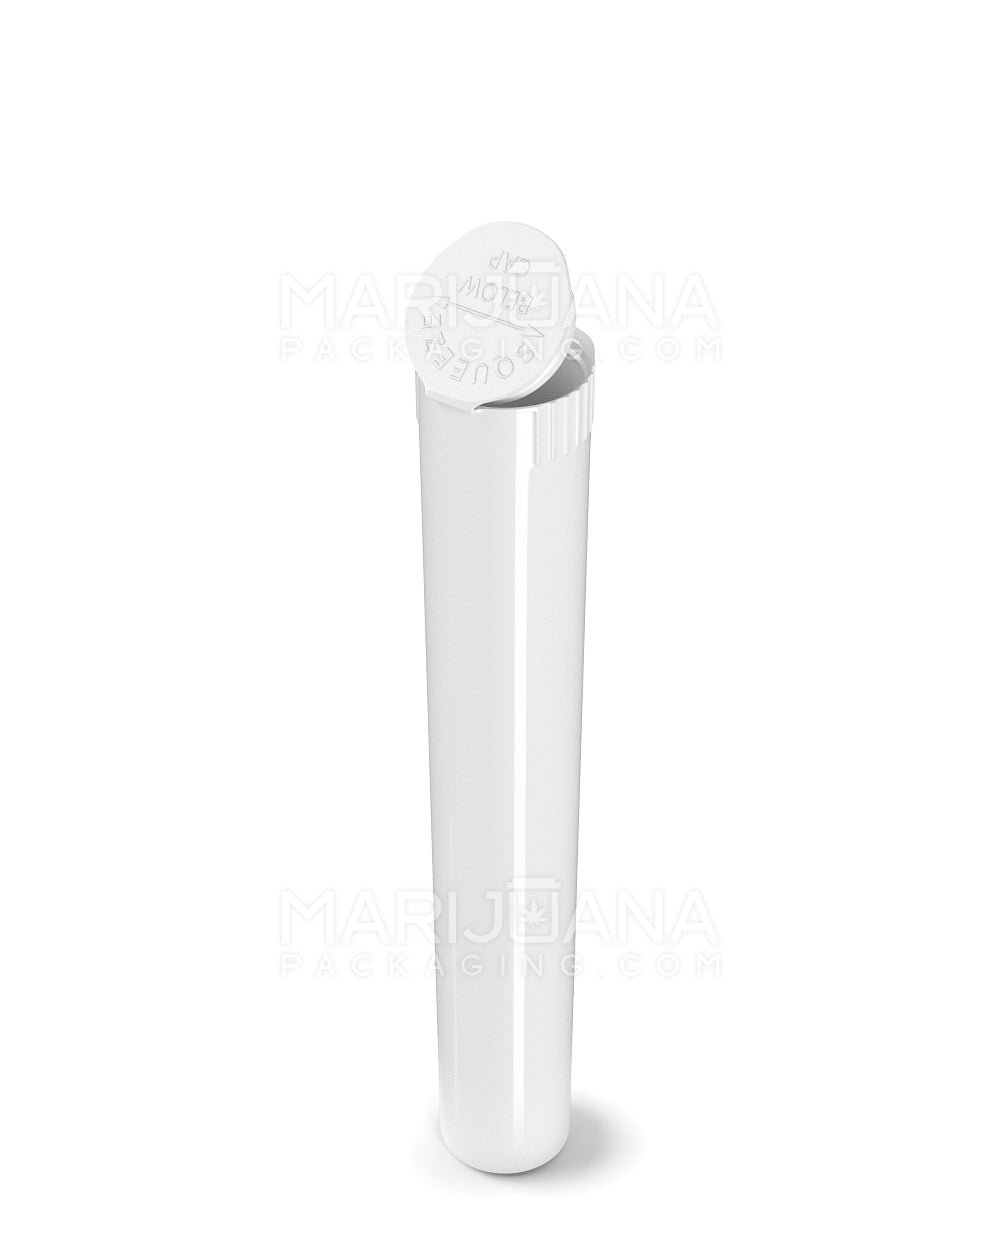 Child Resistant | King Size Pop Top Opaque Plastic PCR Pre-Roll Tubes (Open) | 116mm - White - 1000 Count - 3